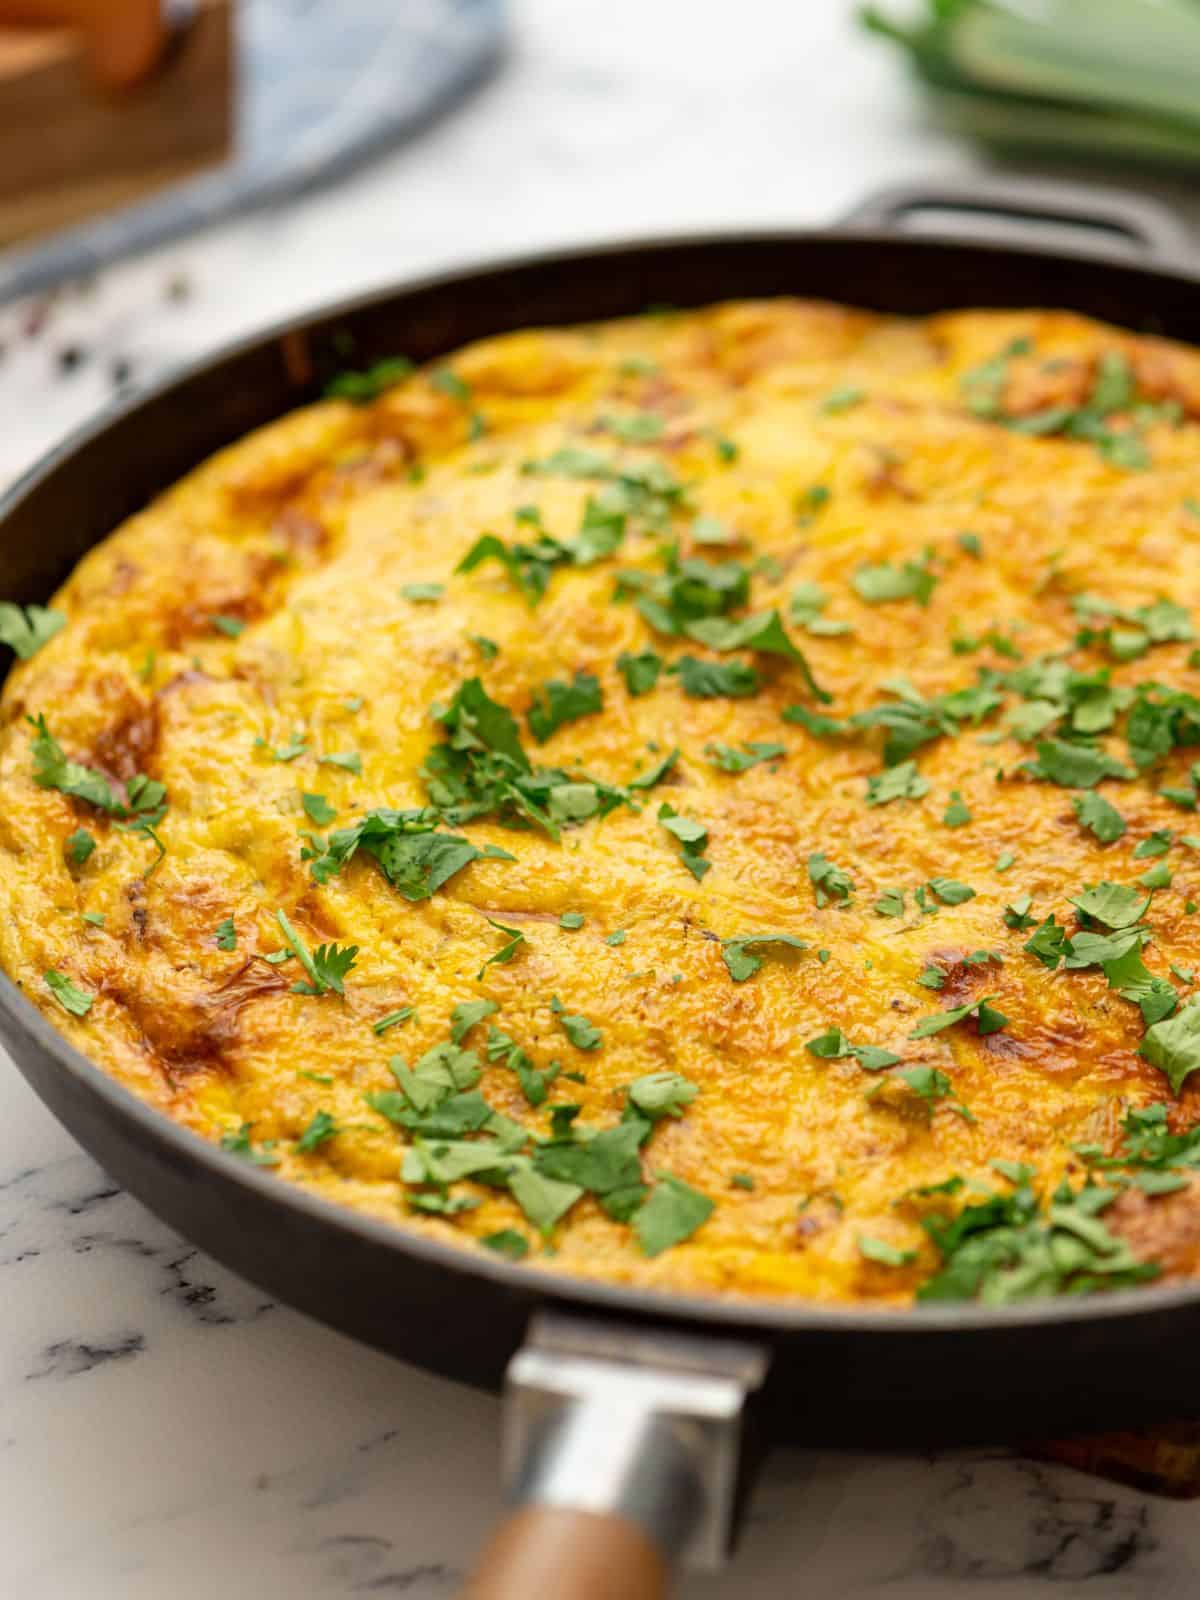 Baked Frittata with potatoes and bacon in oven-safe skillet.